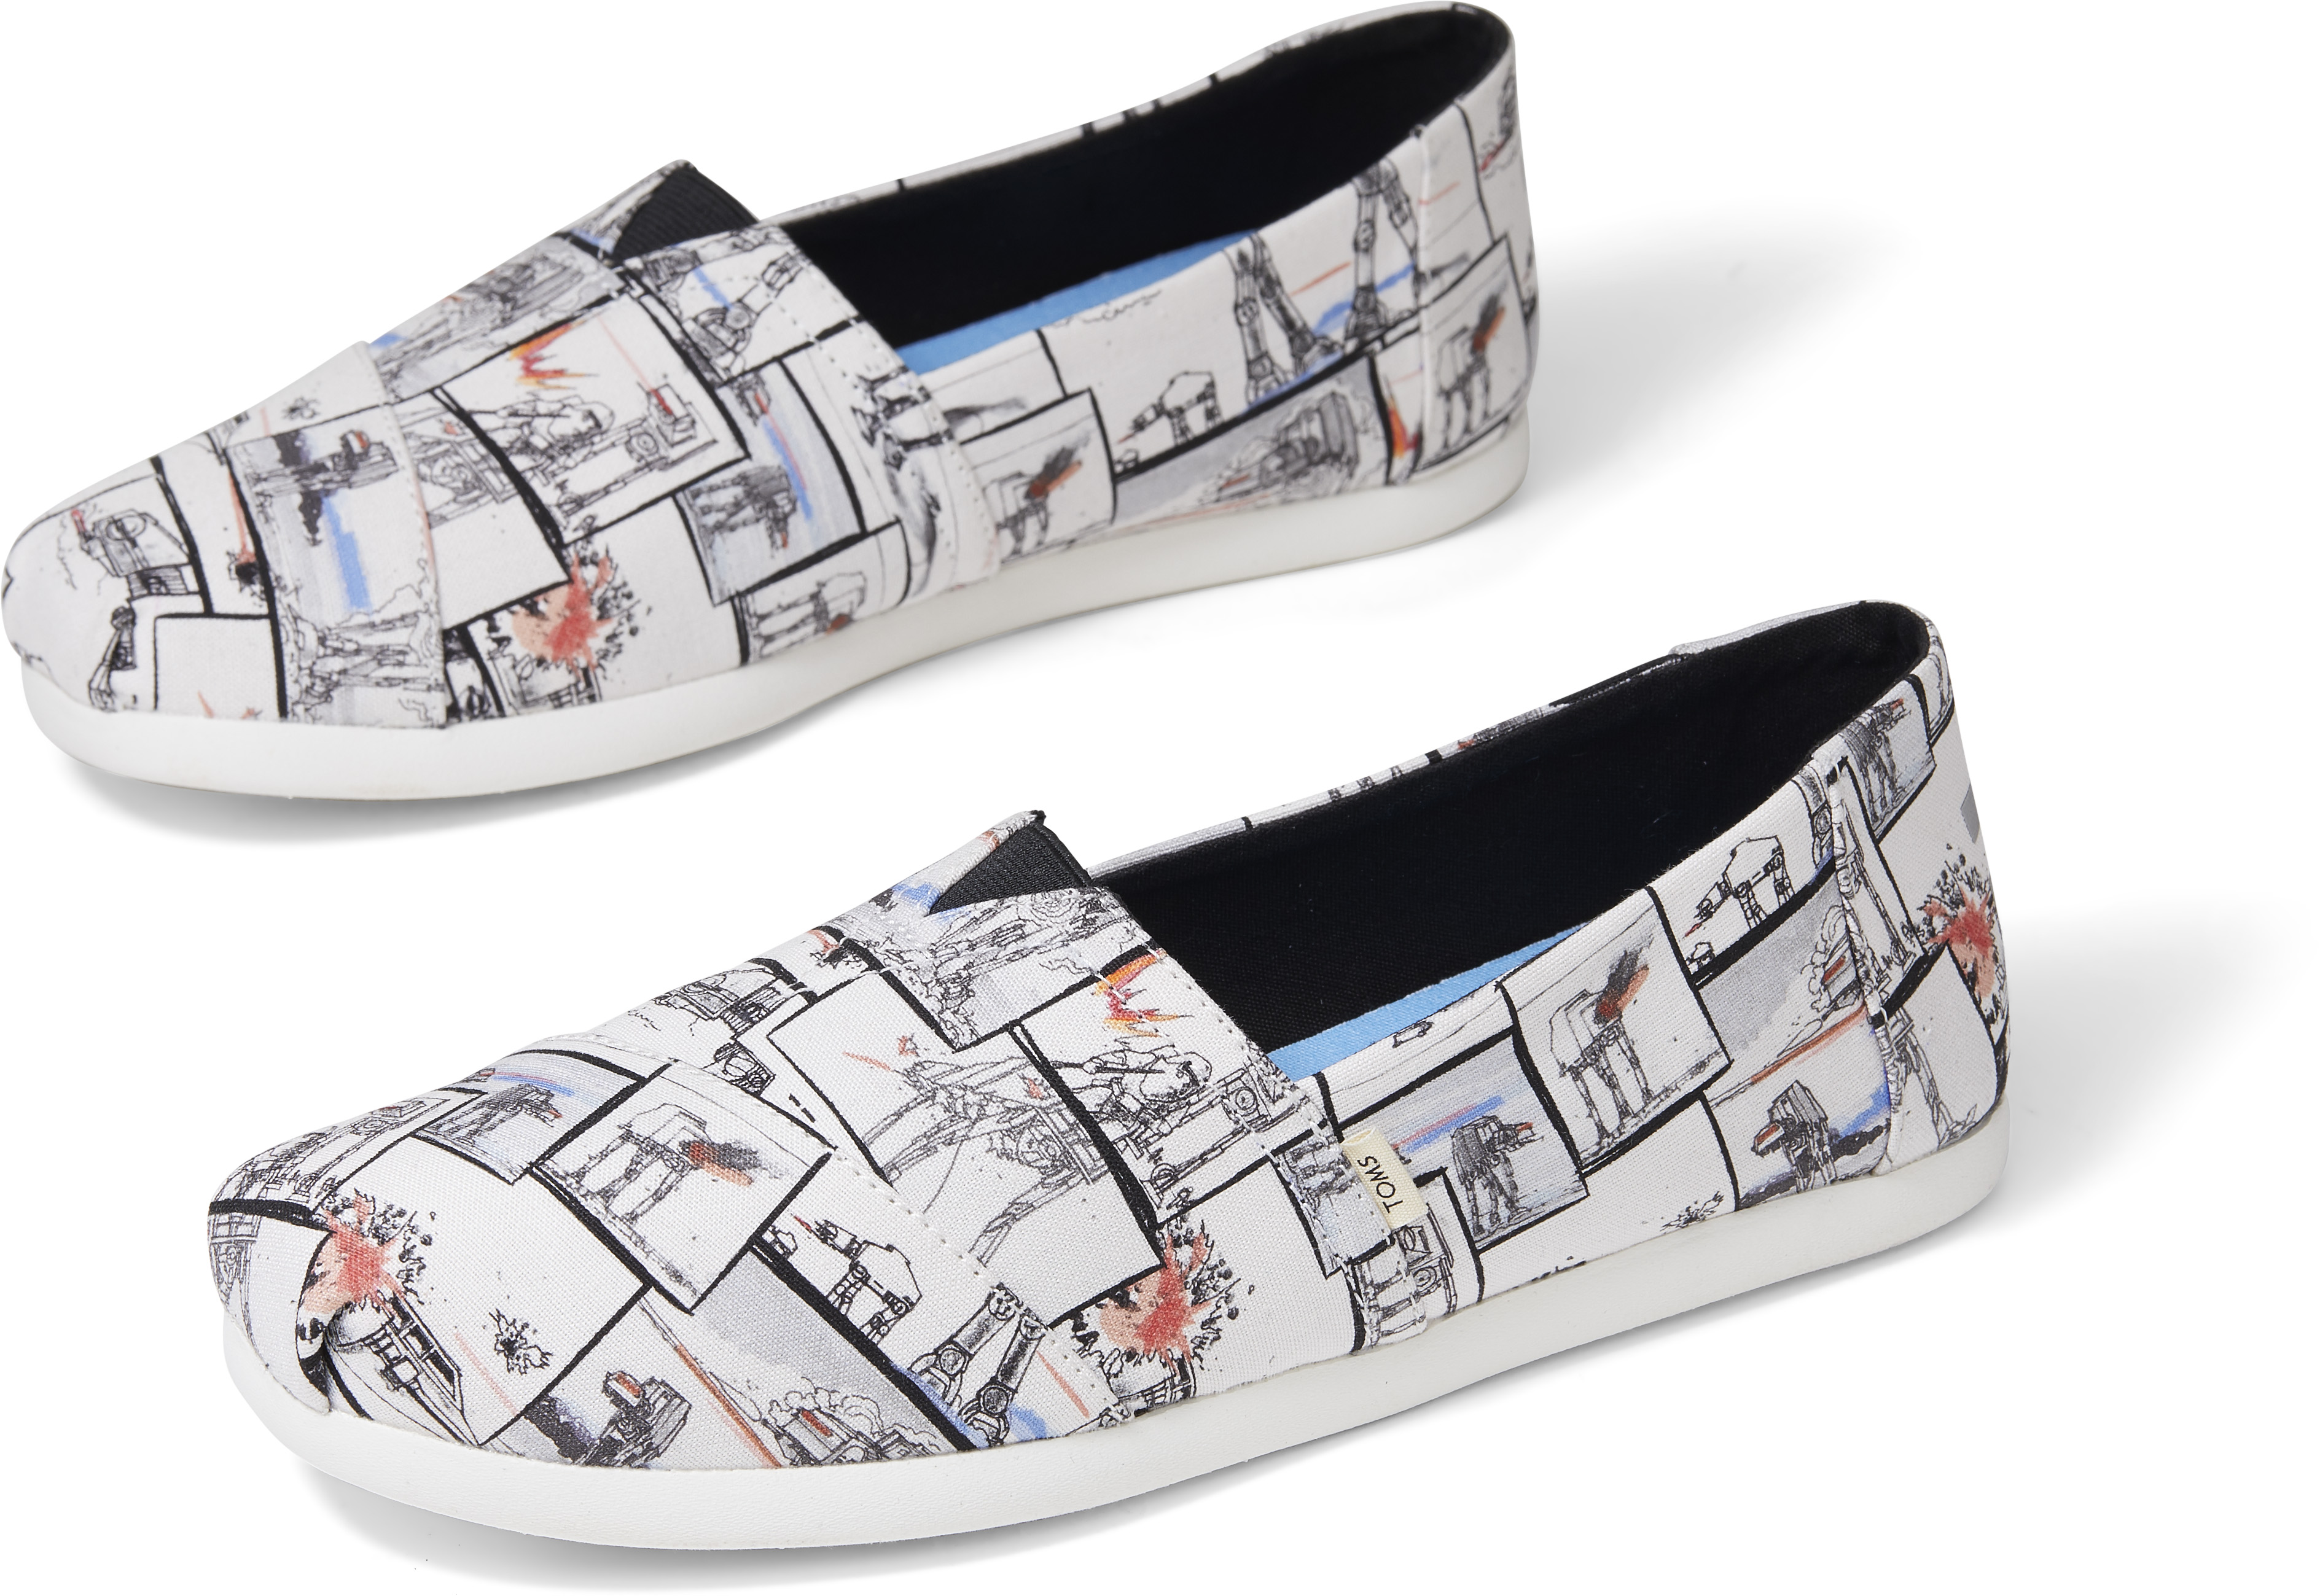 One of the new pairs of Star Wars inspired shoes by TOMS.